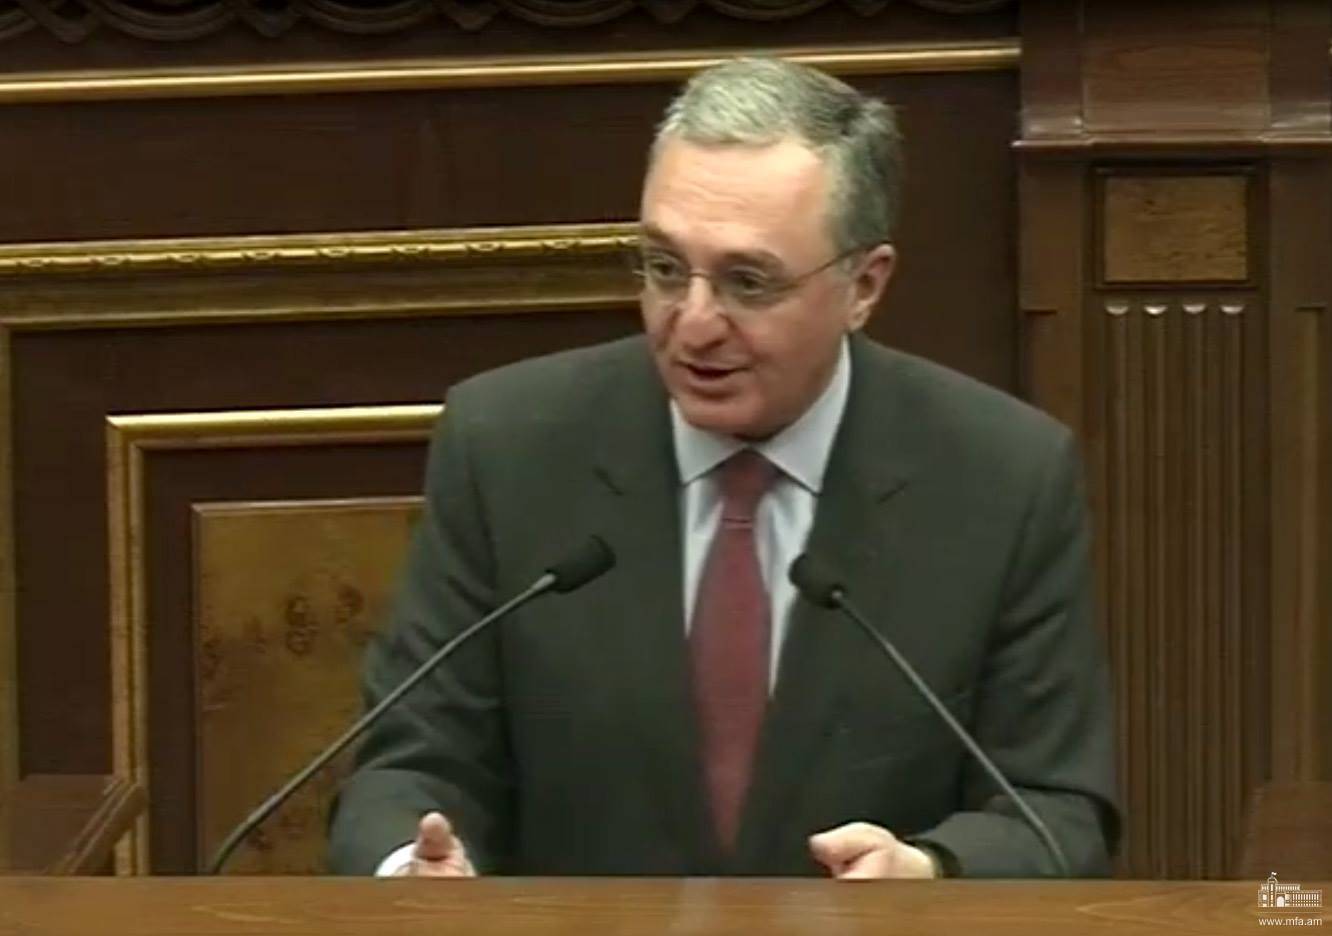 The answers of Minister of Foreign Affairs Zohrab Mnatsakanyan during the Q&A session with the Deputies in the National Assembly